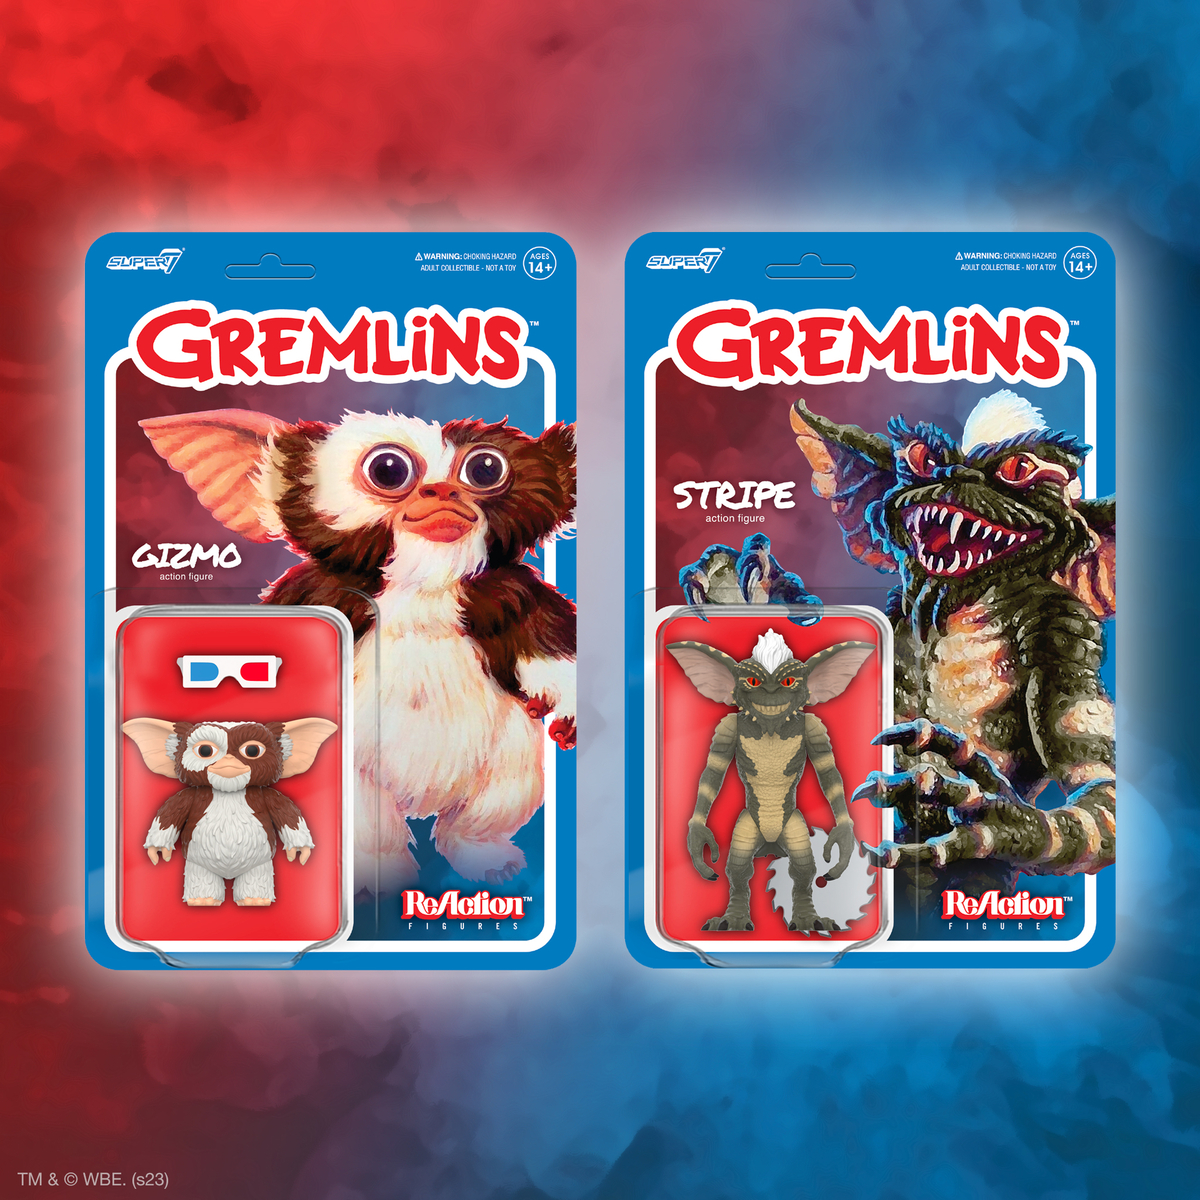 🎁🌟 GREMLINS REACTION GIVEAWAY 🌟🎁 We are giving away Gizmo & Stripe Gremlins ReAction Figures! 👹 HOW TO ENTER: 1. Follow us @super7store! 2. RT and like this post and share your favorite Gremlins moment or character in the comments! #Super7 #Giveaway #super7giveaway